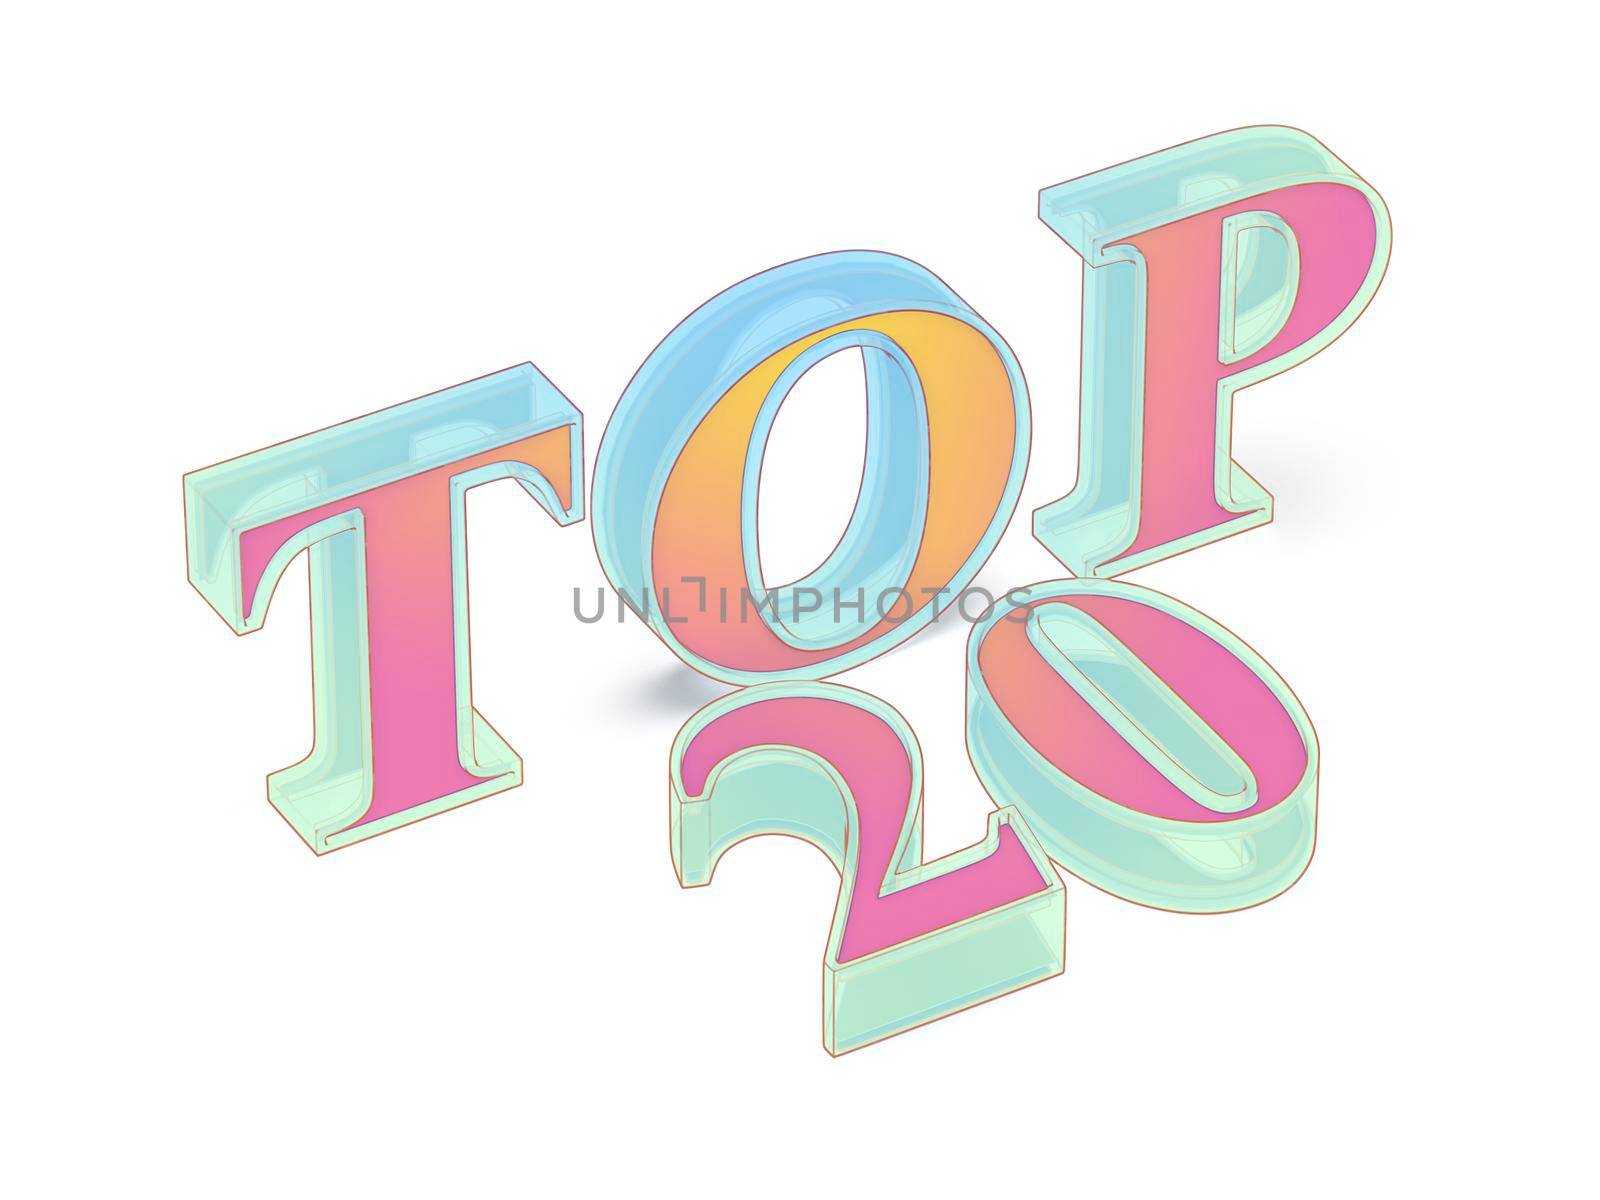 Top 20 by magraphics